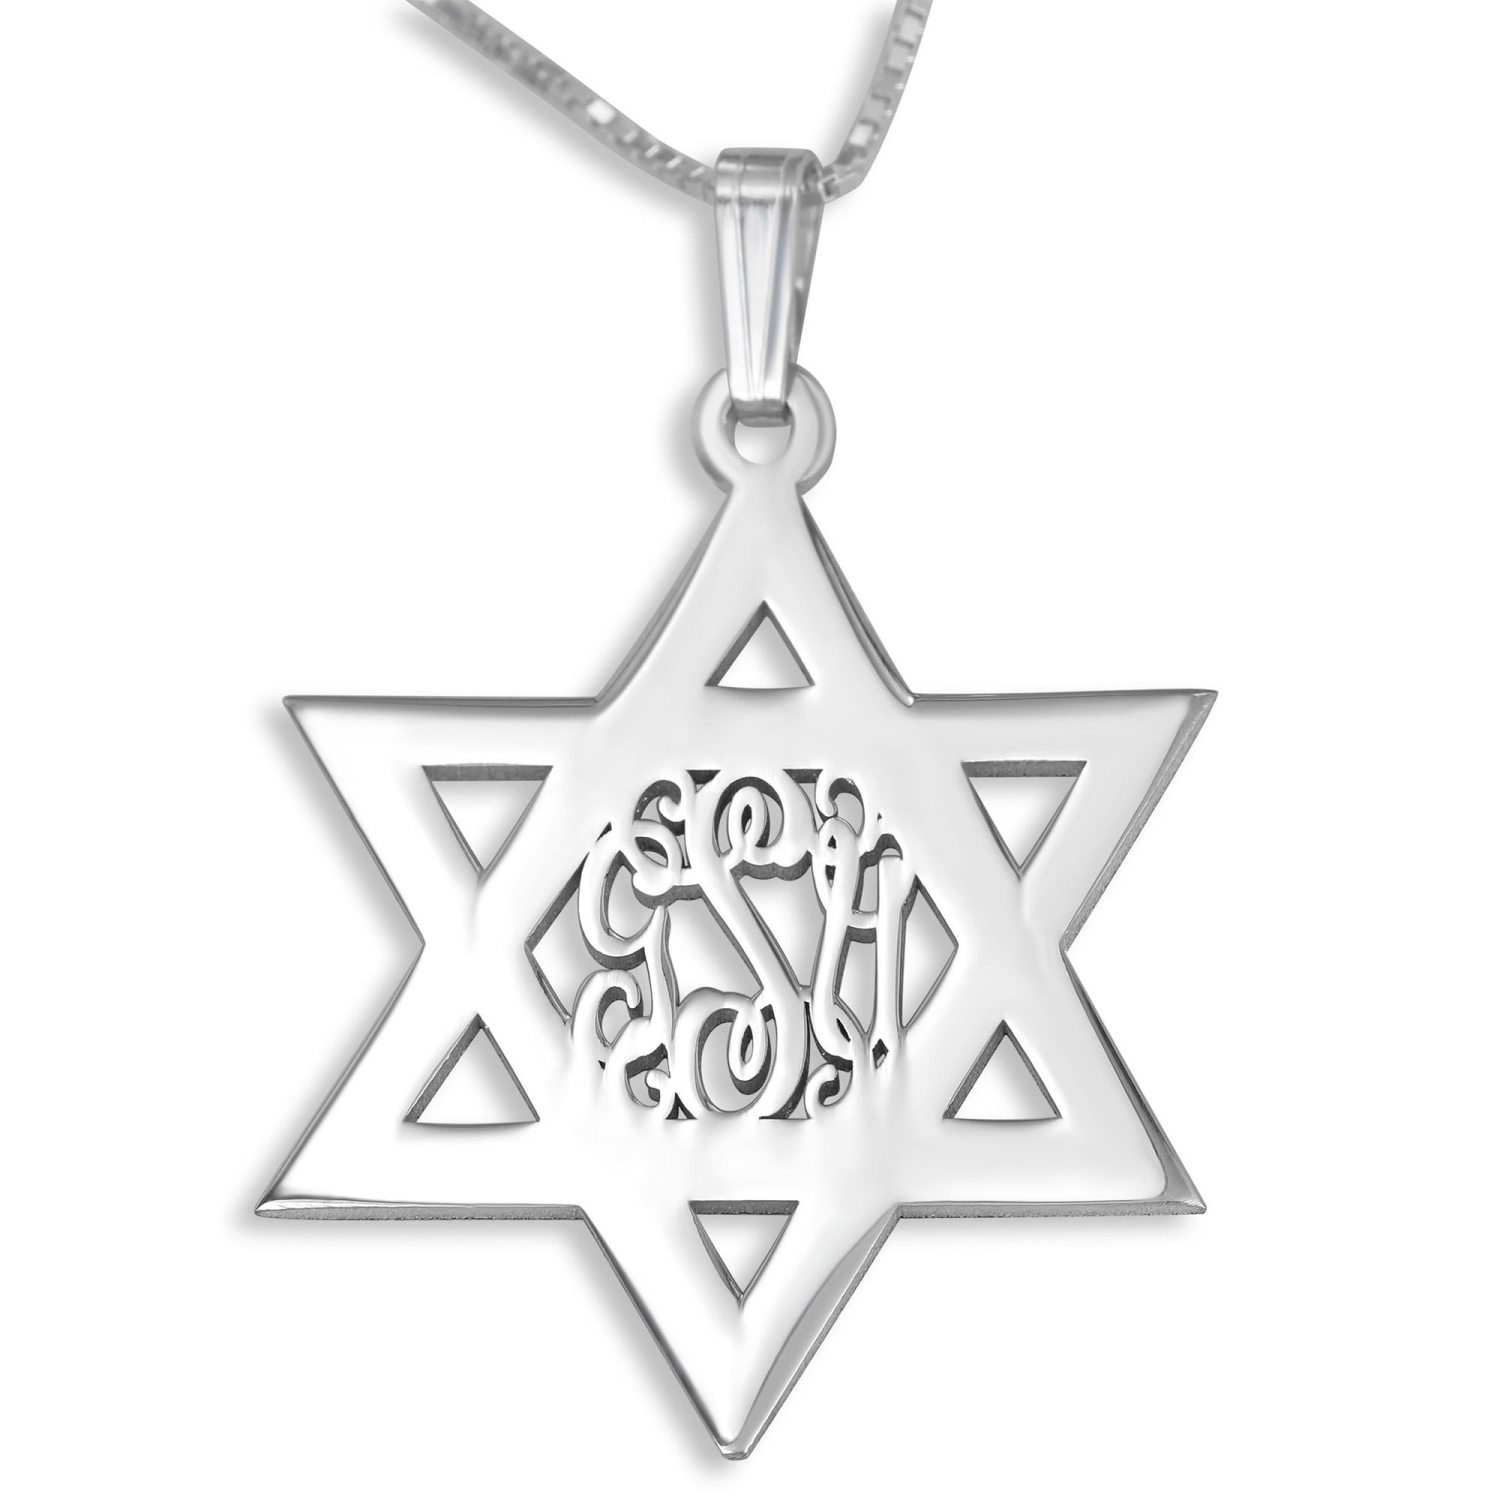 Silver Star of David Monogram Personalized Name Necklace - English/Hebrew - 1